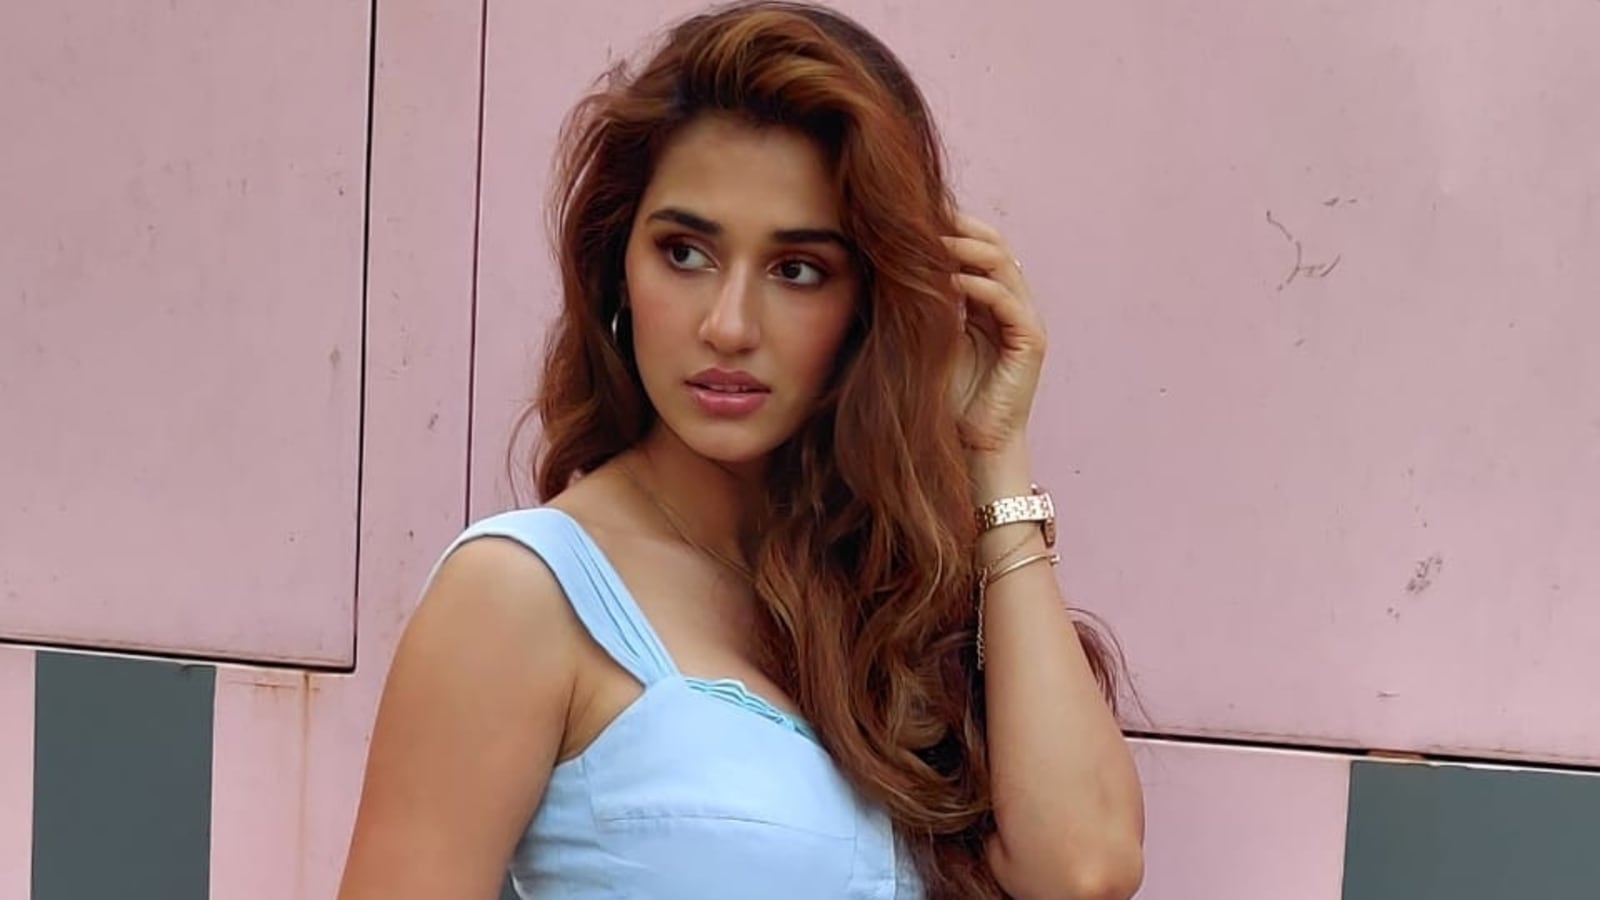 When Disha Patani said no guy has ever told her they find her hot: ‘No one flirts with me’